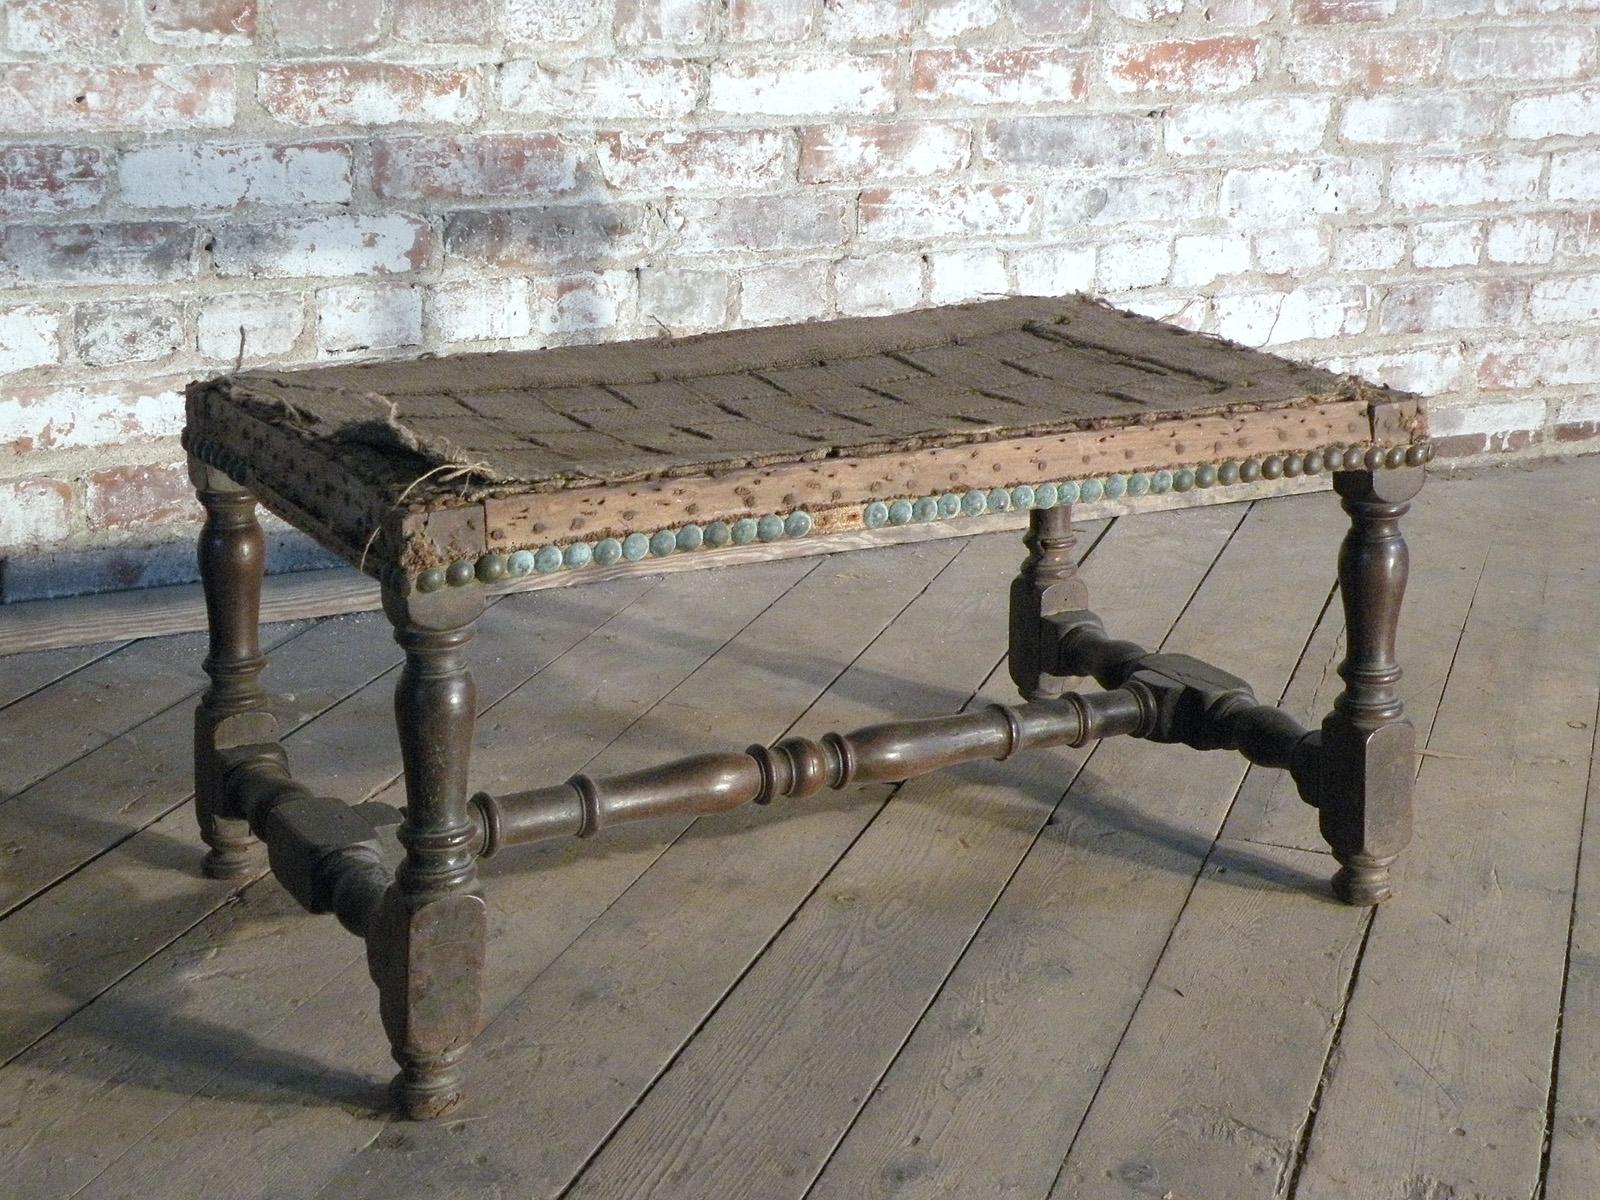 French early 18th Century Baroque Bench or Footstool of elongated proportions. Walnut frame with nicely turned legs and conforming H-stretcher, good color with deep patina. Solid pegged construction. The stool can be seen in person at the Fortress